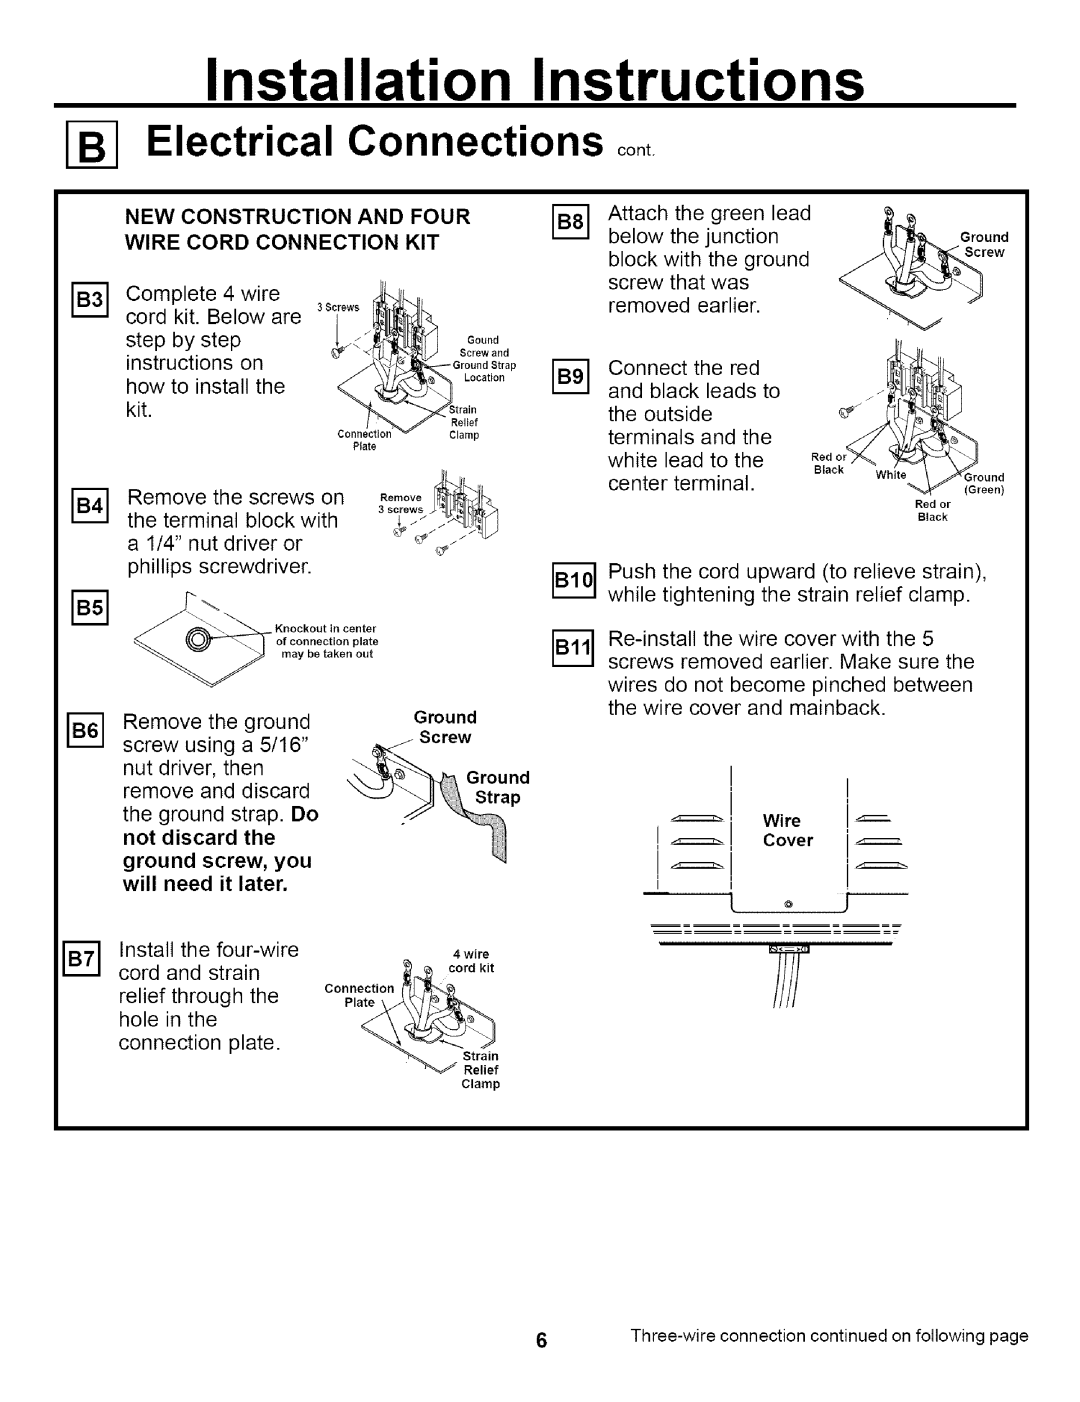 GE JBP79 Installation Instructions, Electrical Connections cont, New Construction And Four, Wire Cord Connection Kit 